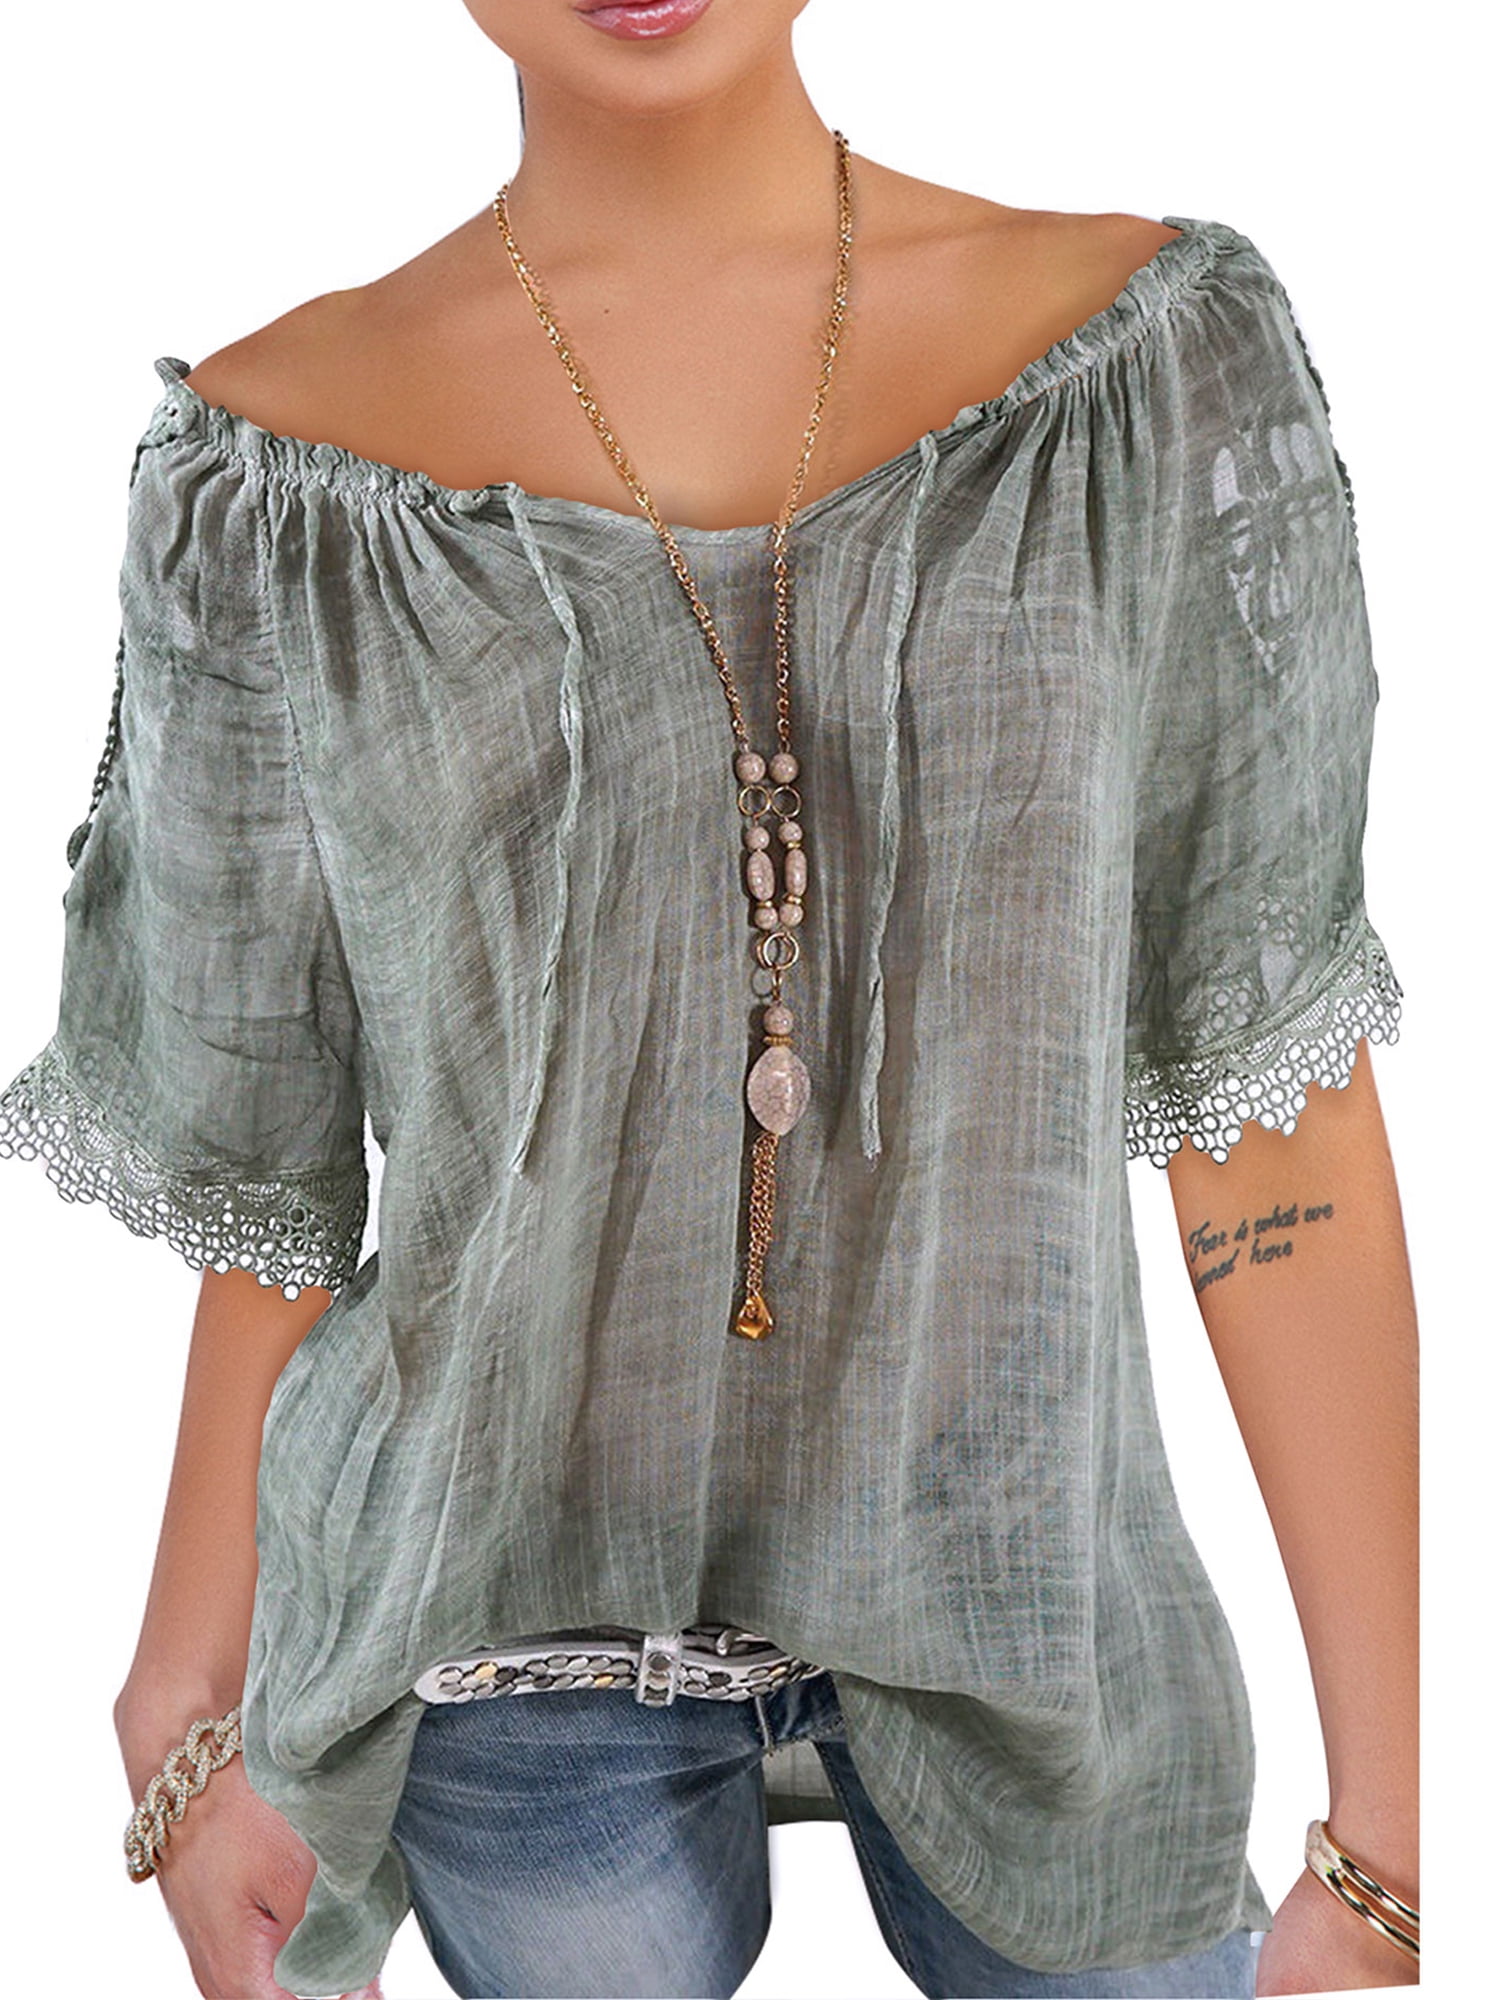 Womens Frill Necklace Gypsy Ladies Tunic V Neck Summer Tops Plus Sizes 12-22 